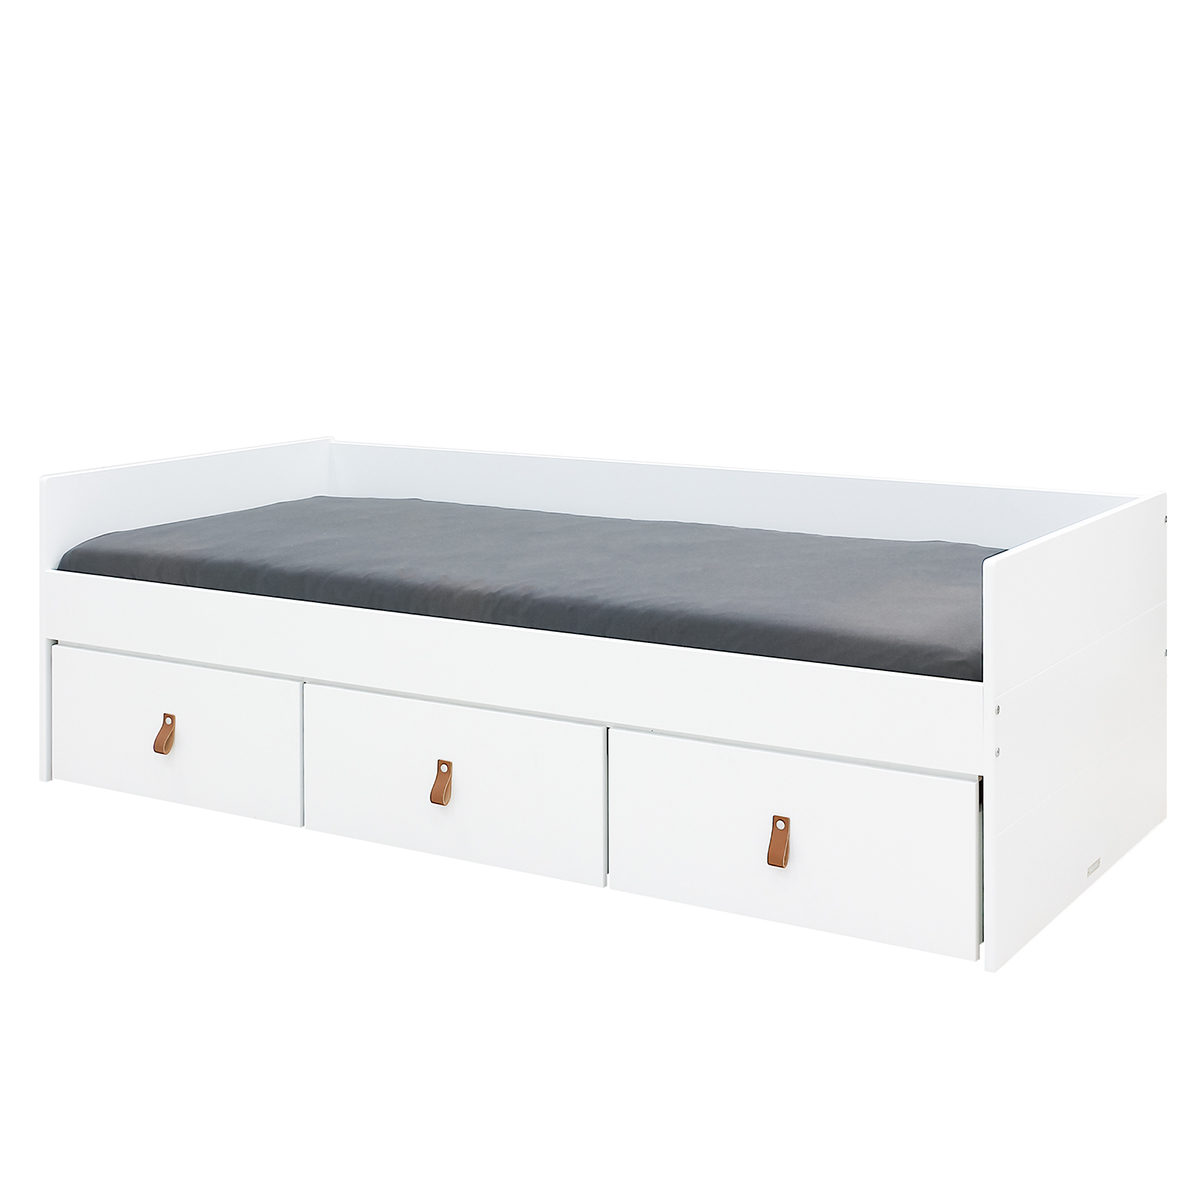 26919503 bench-bed-90x200-Indy